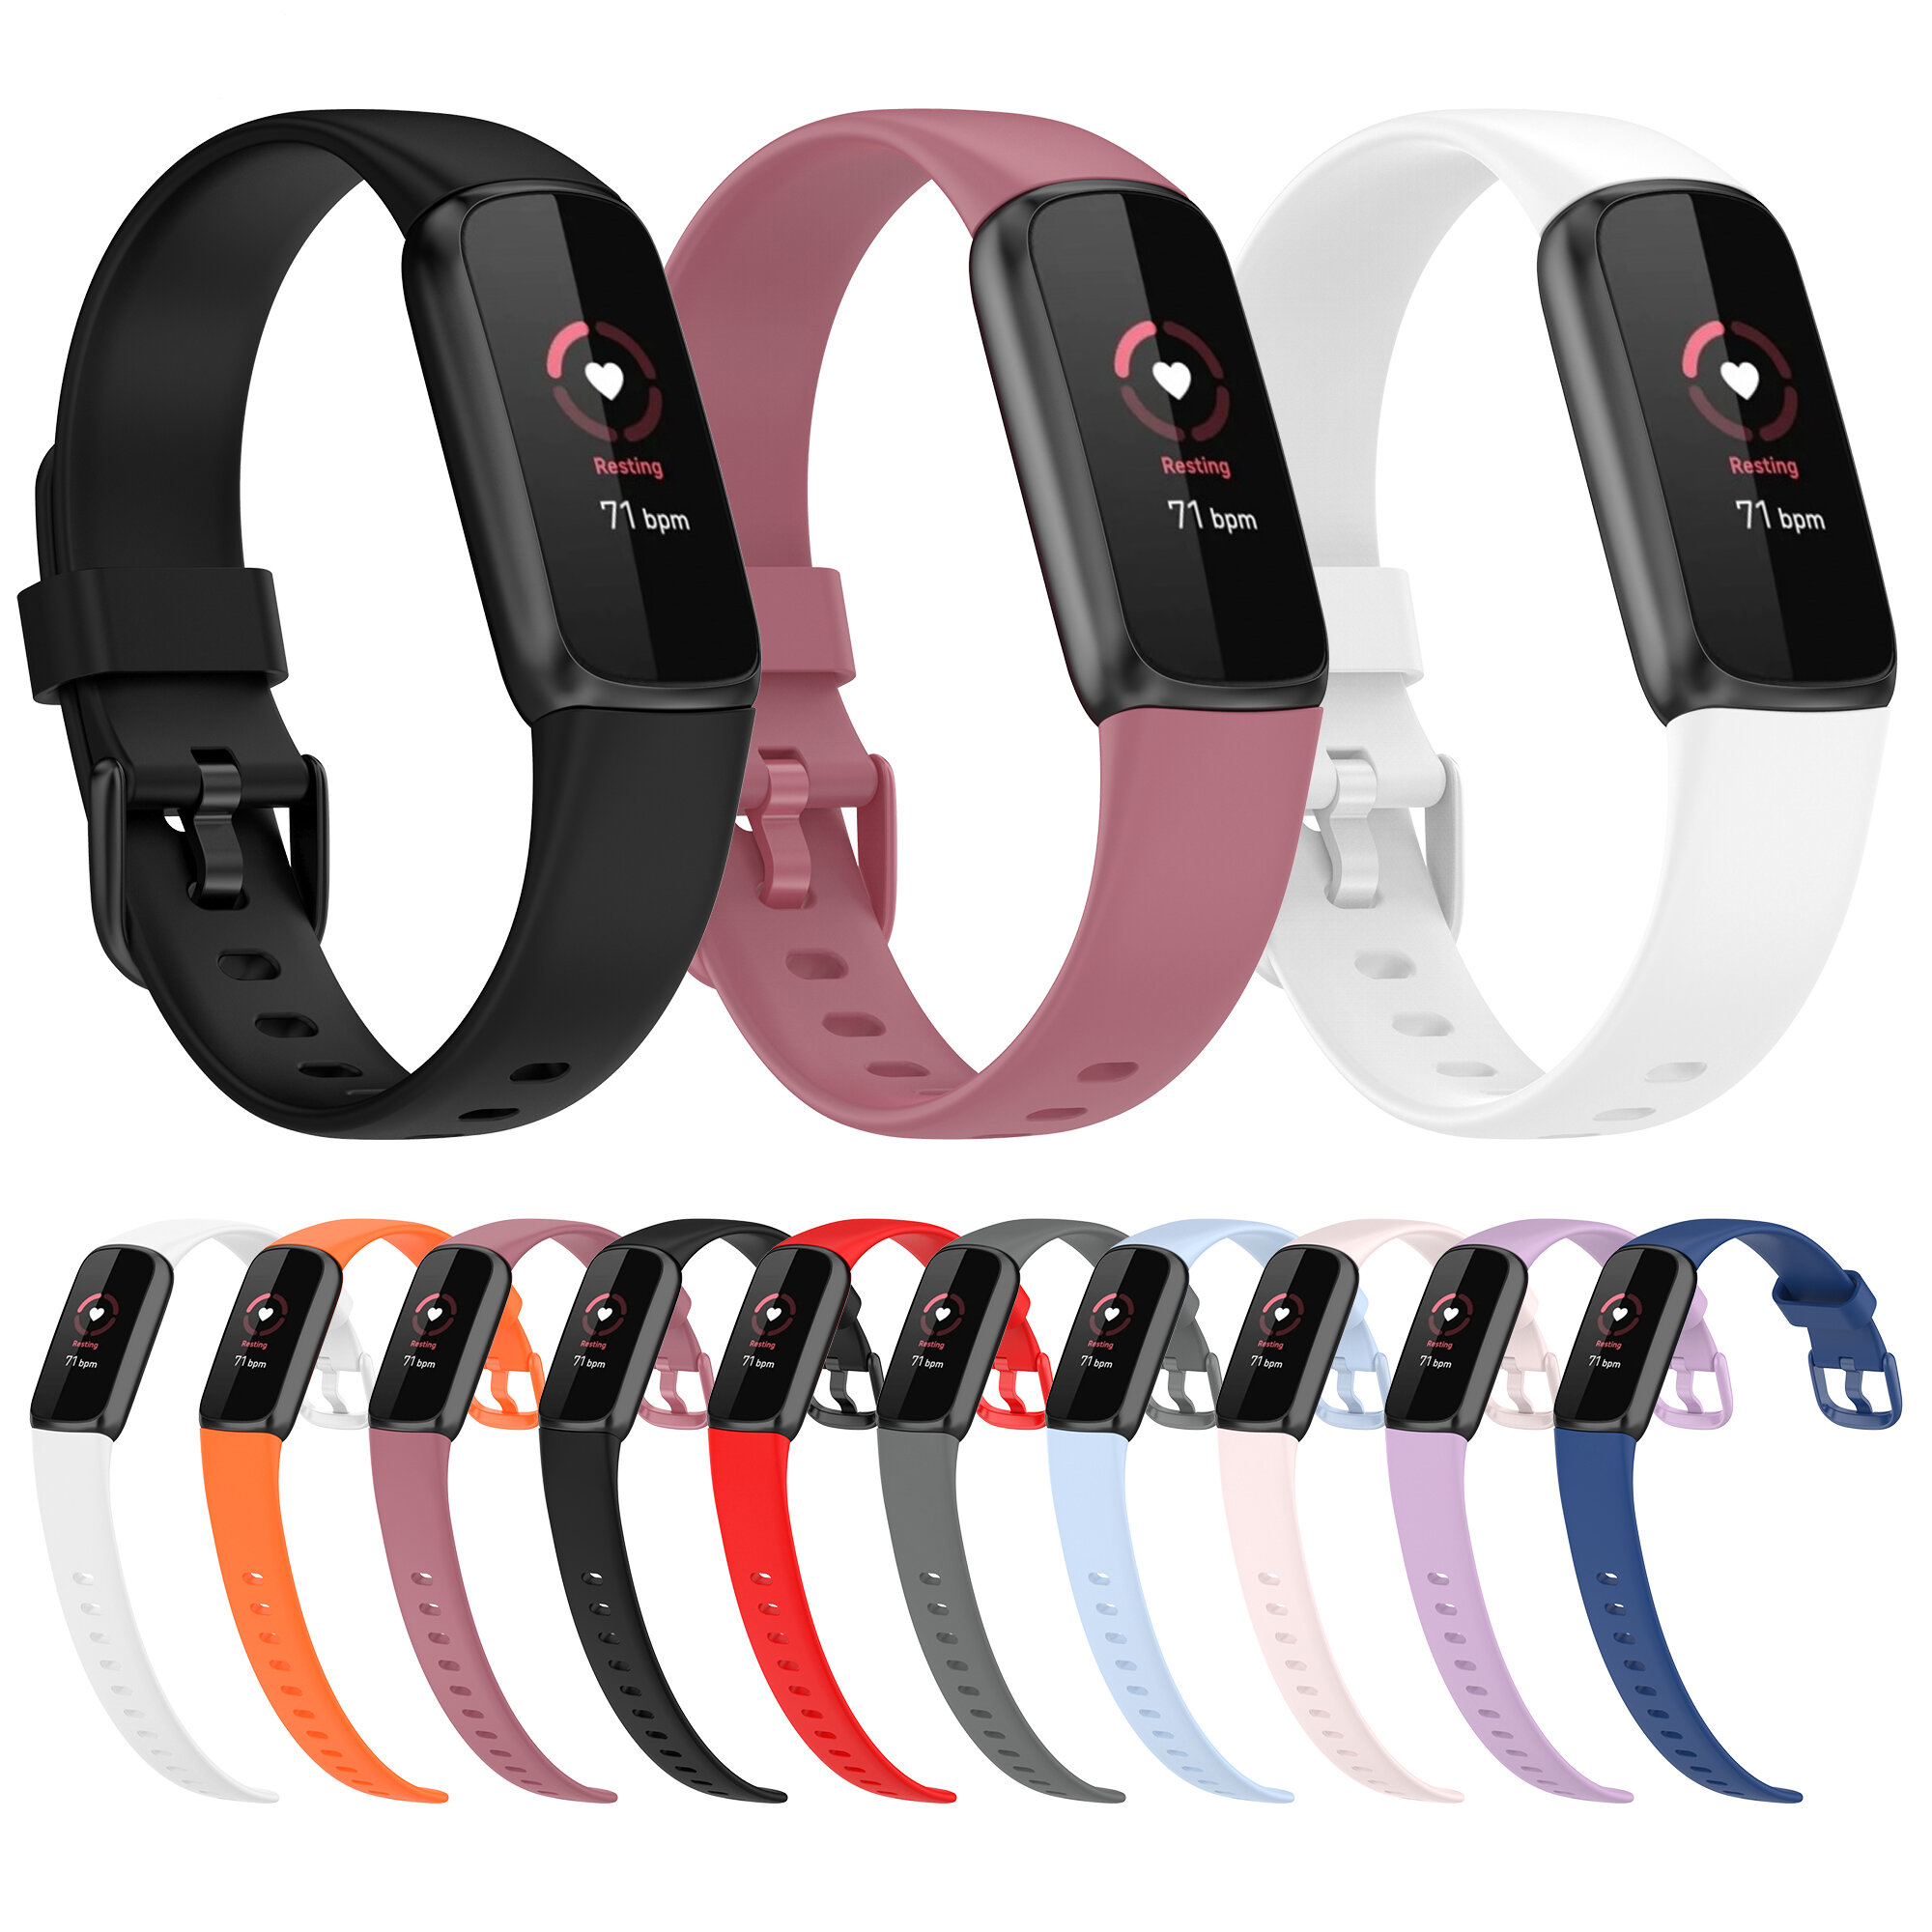 

Bakeey Comfortable Sweatproof Soft Silicone Watch Band Strap Replacement for Fitbit Luxe